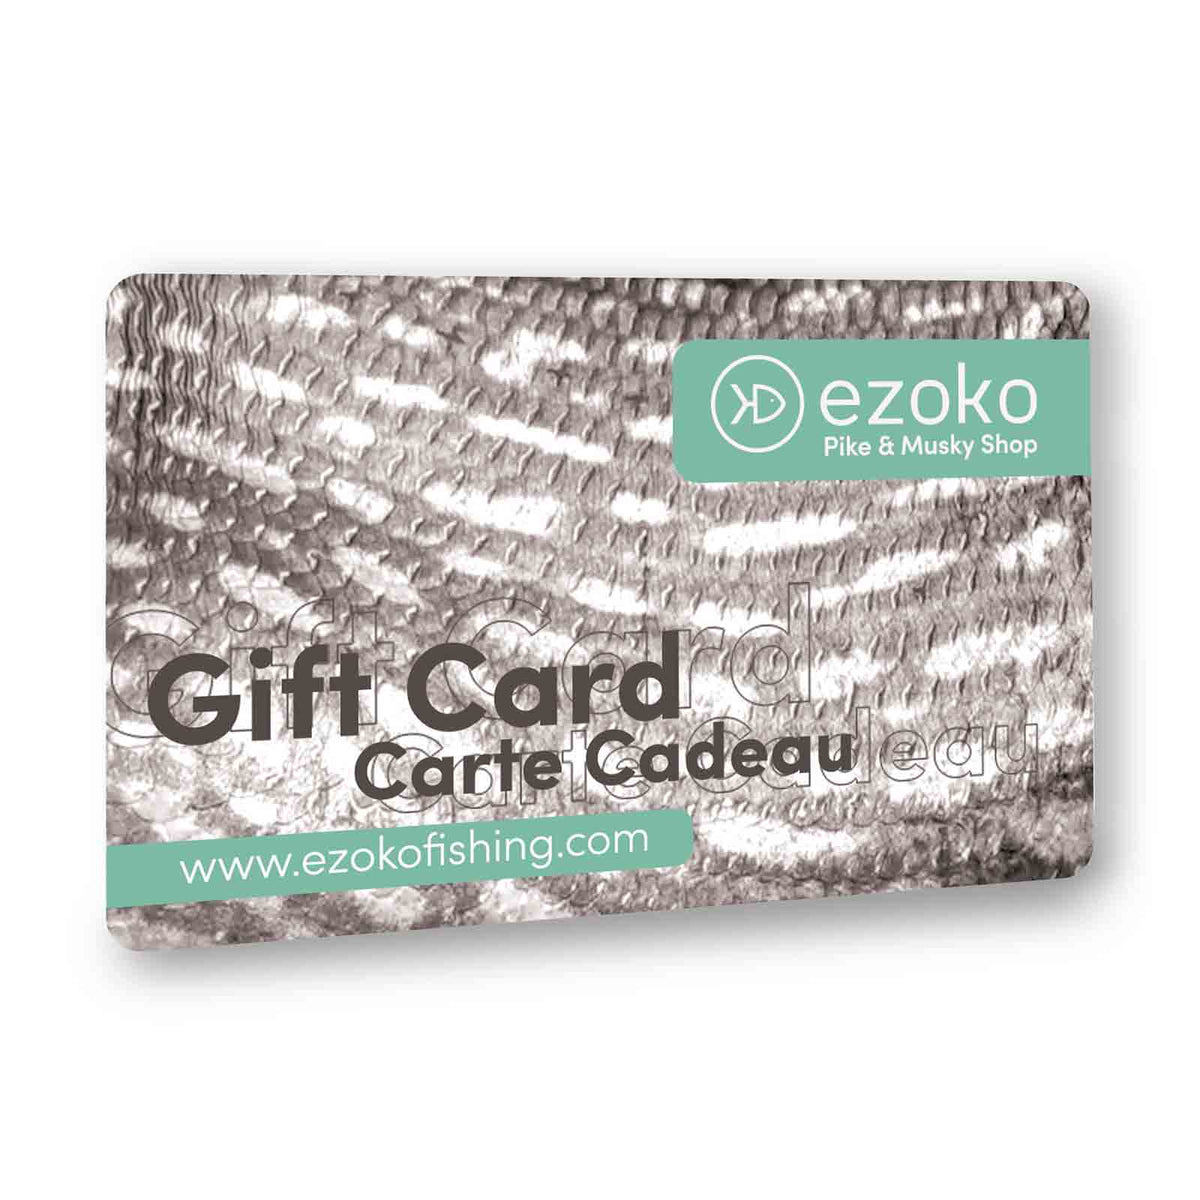 View of Gift_Cards EZOKO Digital E-Gift Card available at EZOKO Pike and Musky Shop